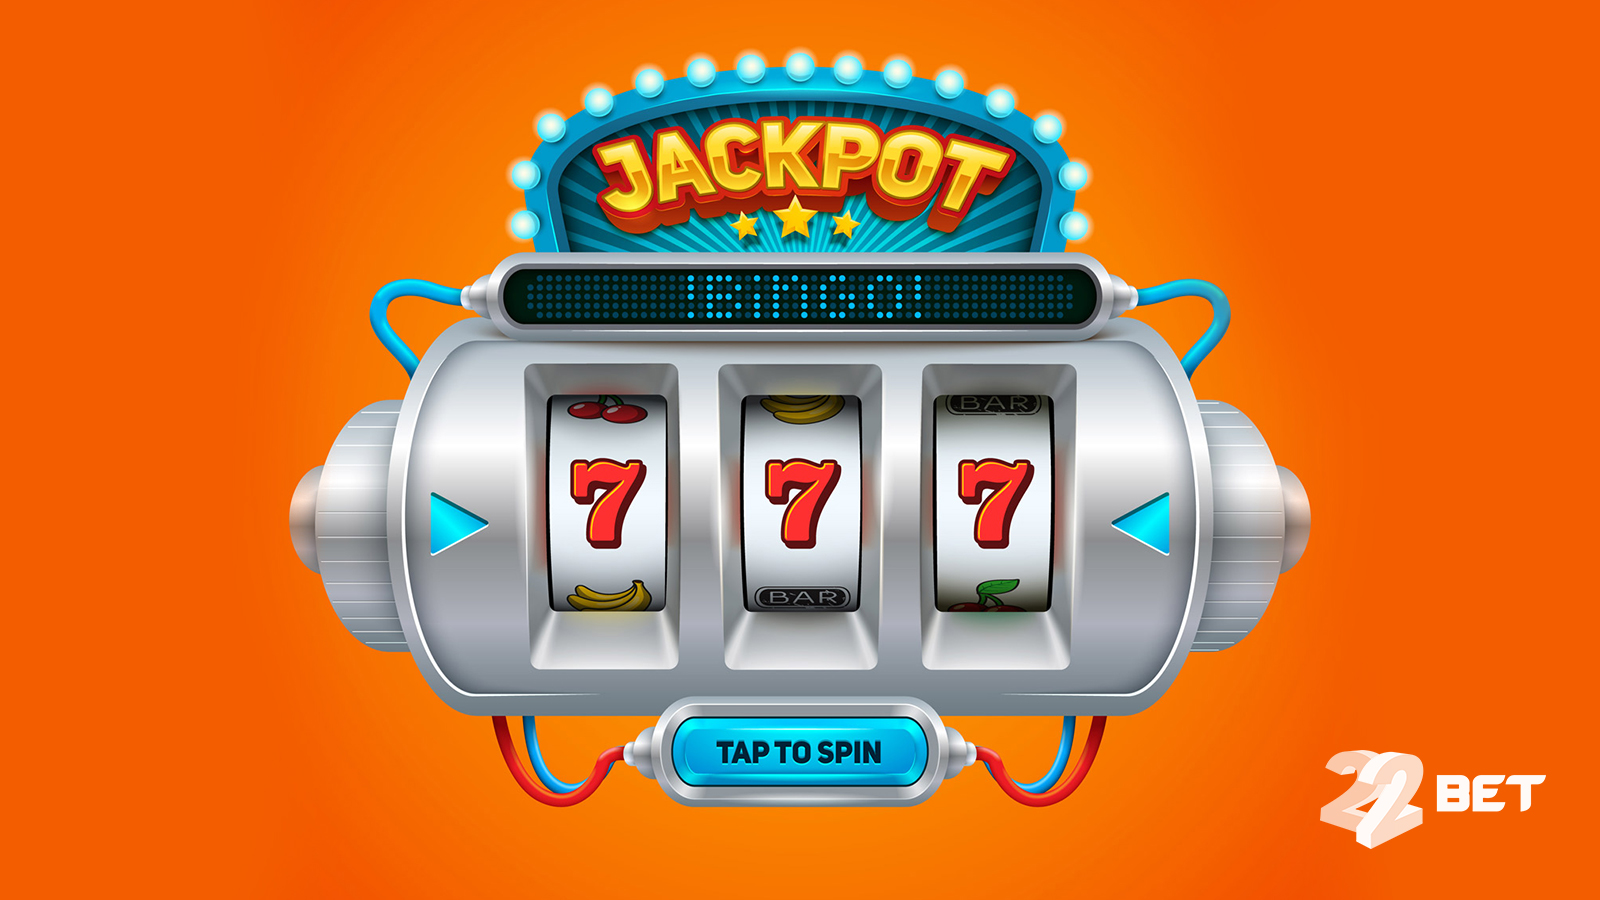 Try to win your part of a progressive jackpot at 22bet jackpot slots.